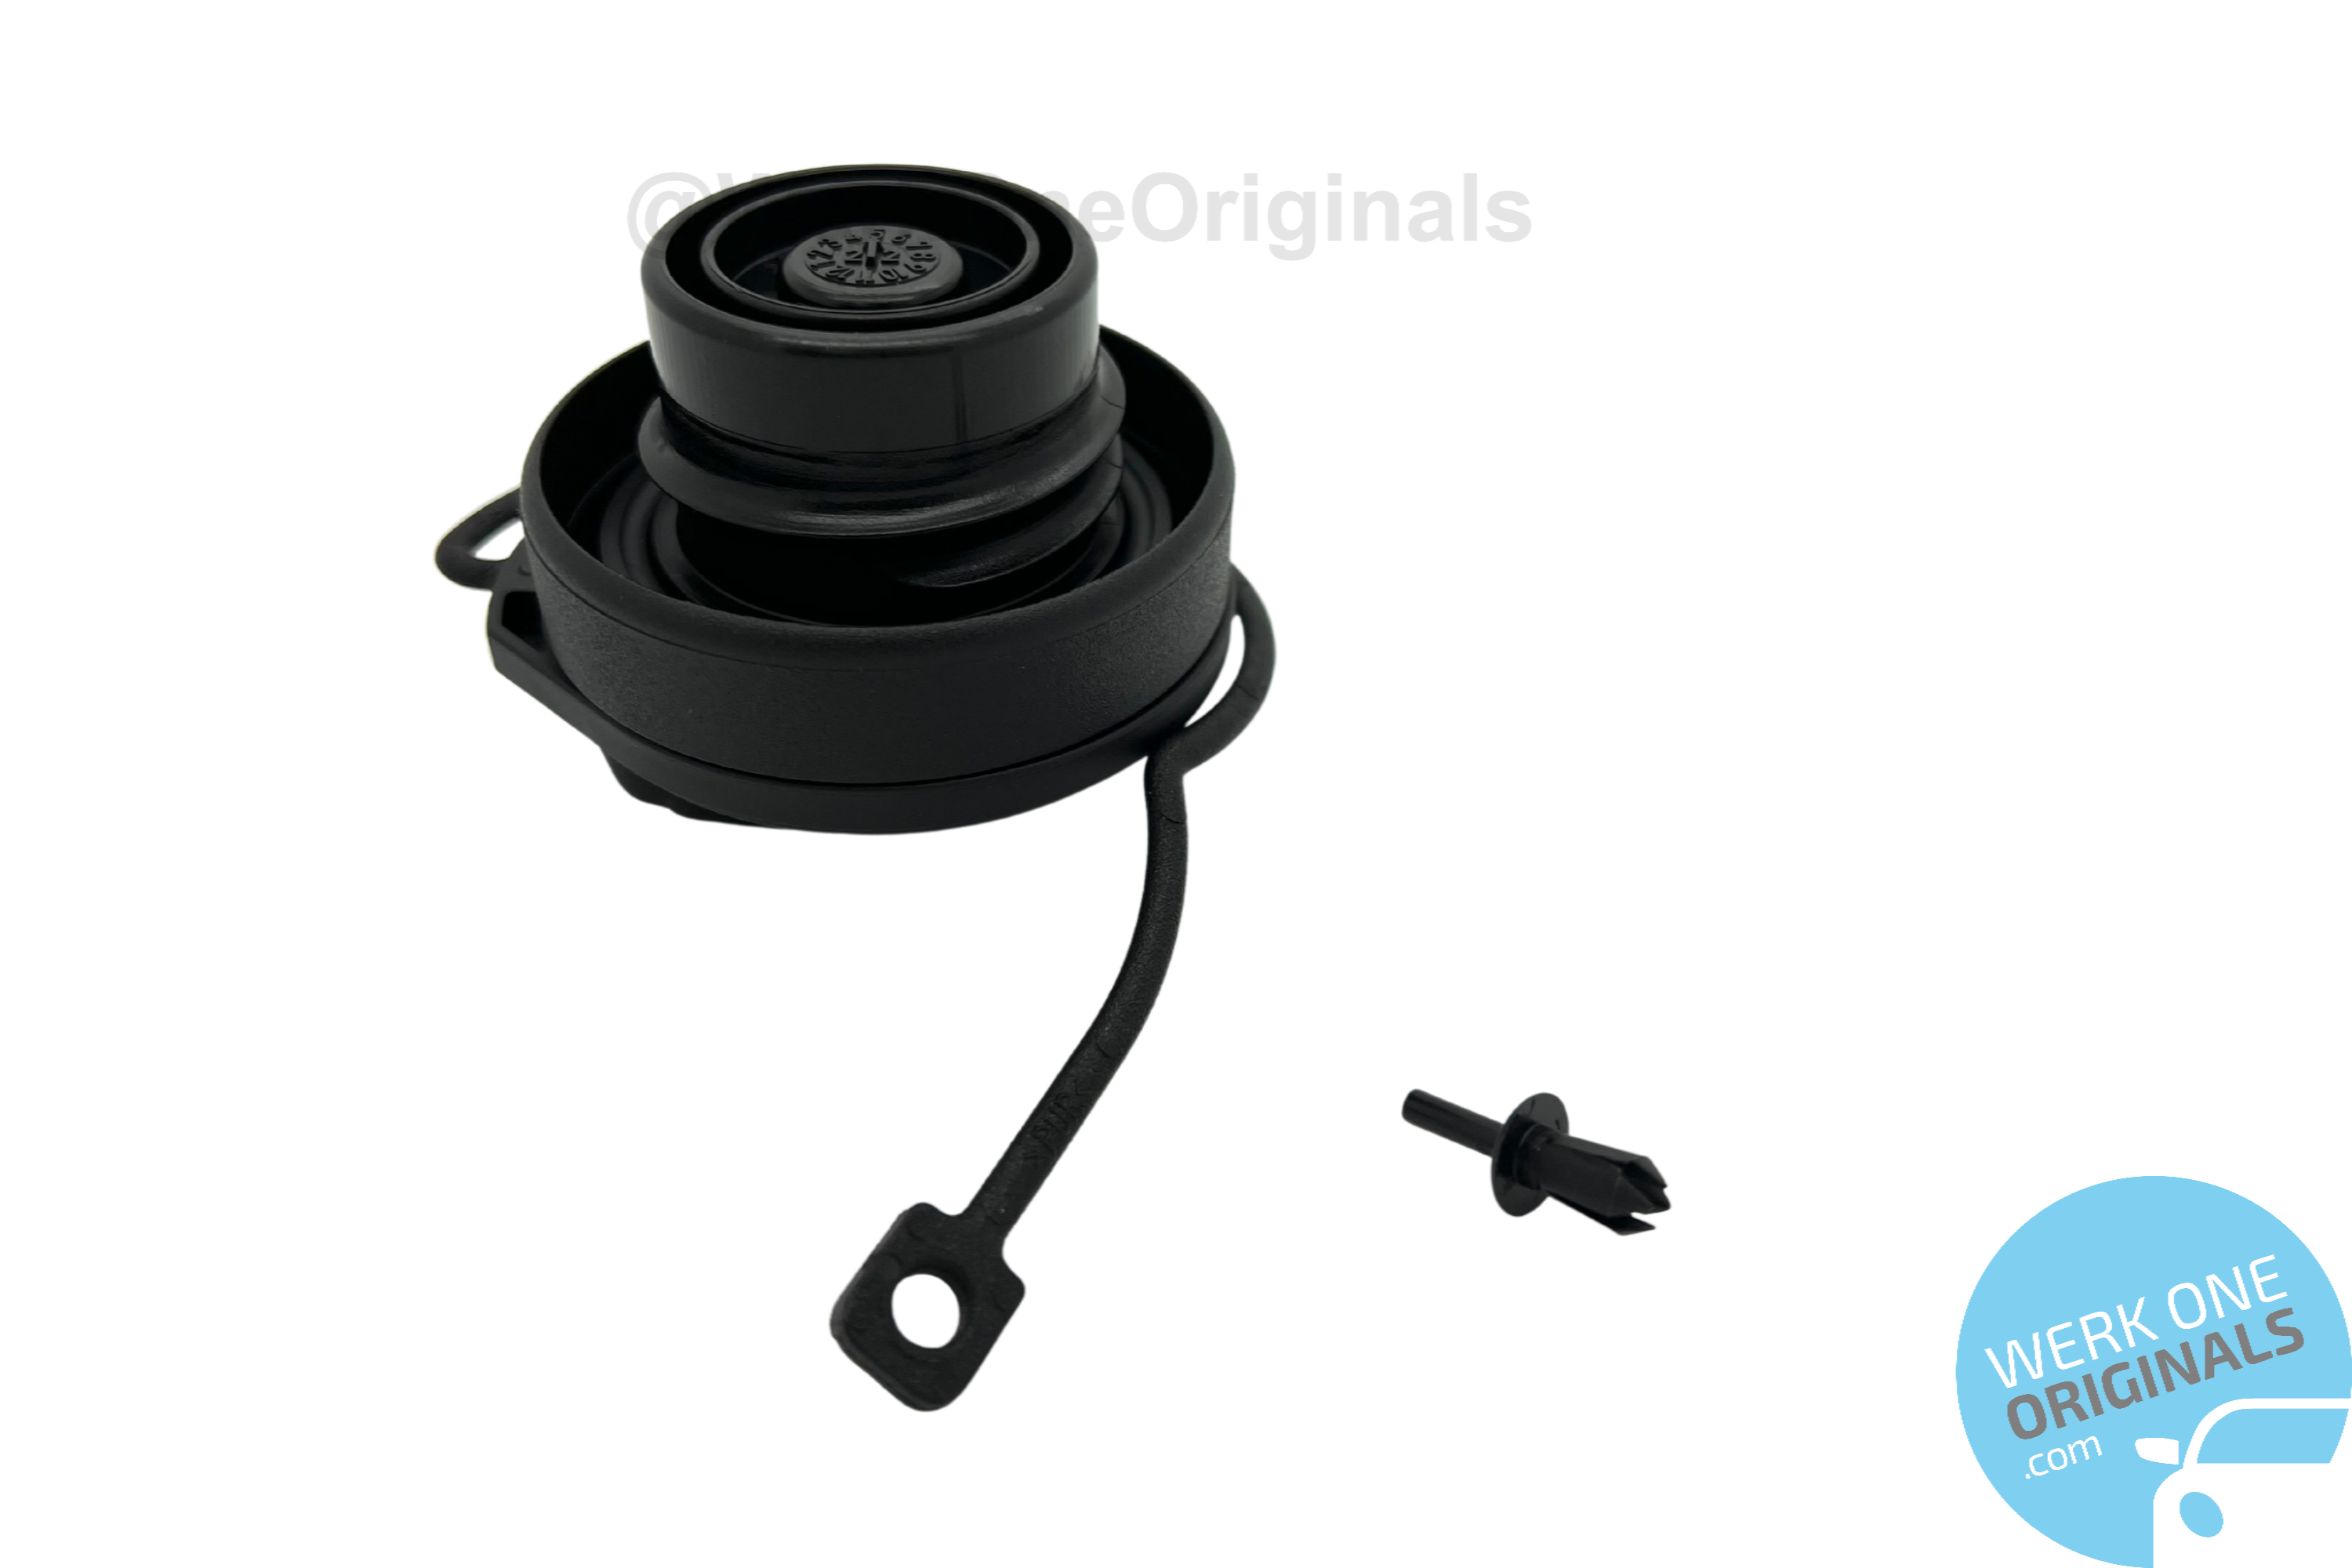 Porsche Genuine Fuel Tank Cap with Expansion Rivet for Boxster Type 987 Models